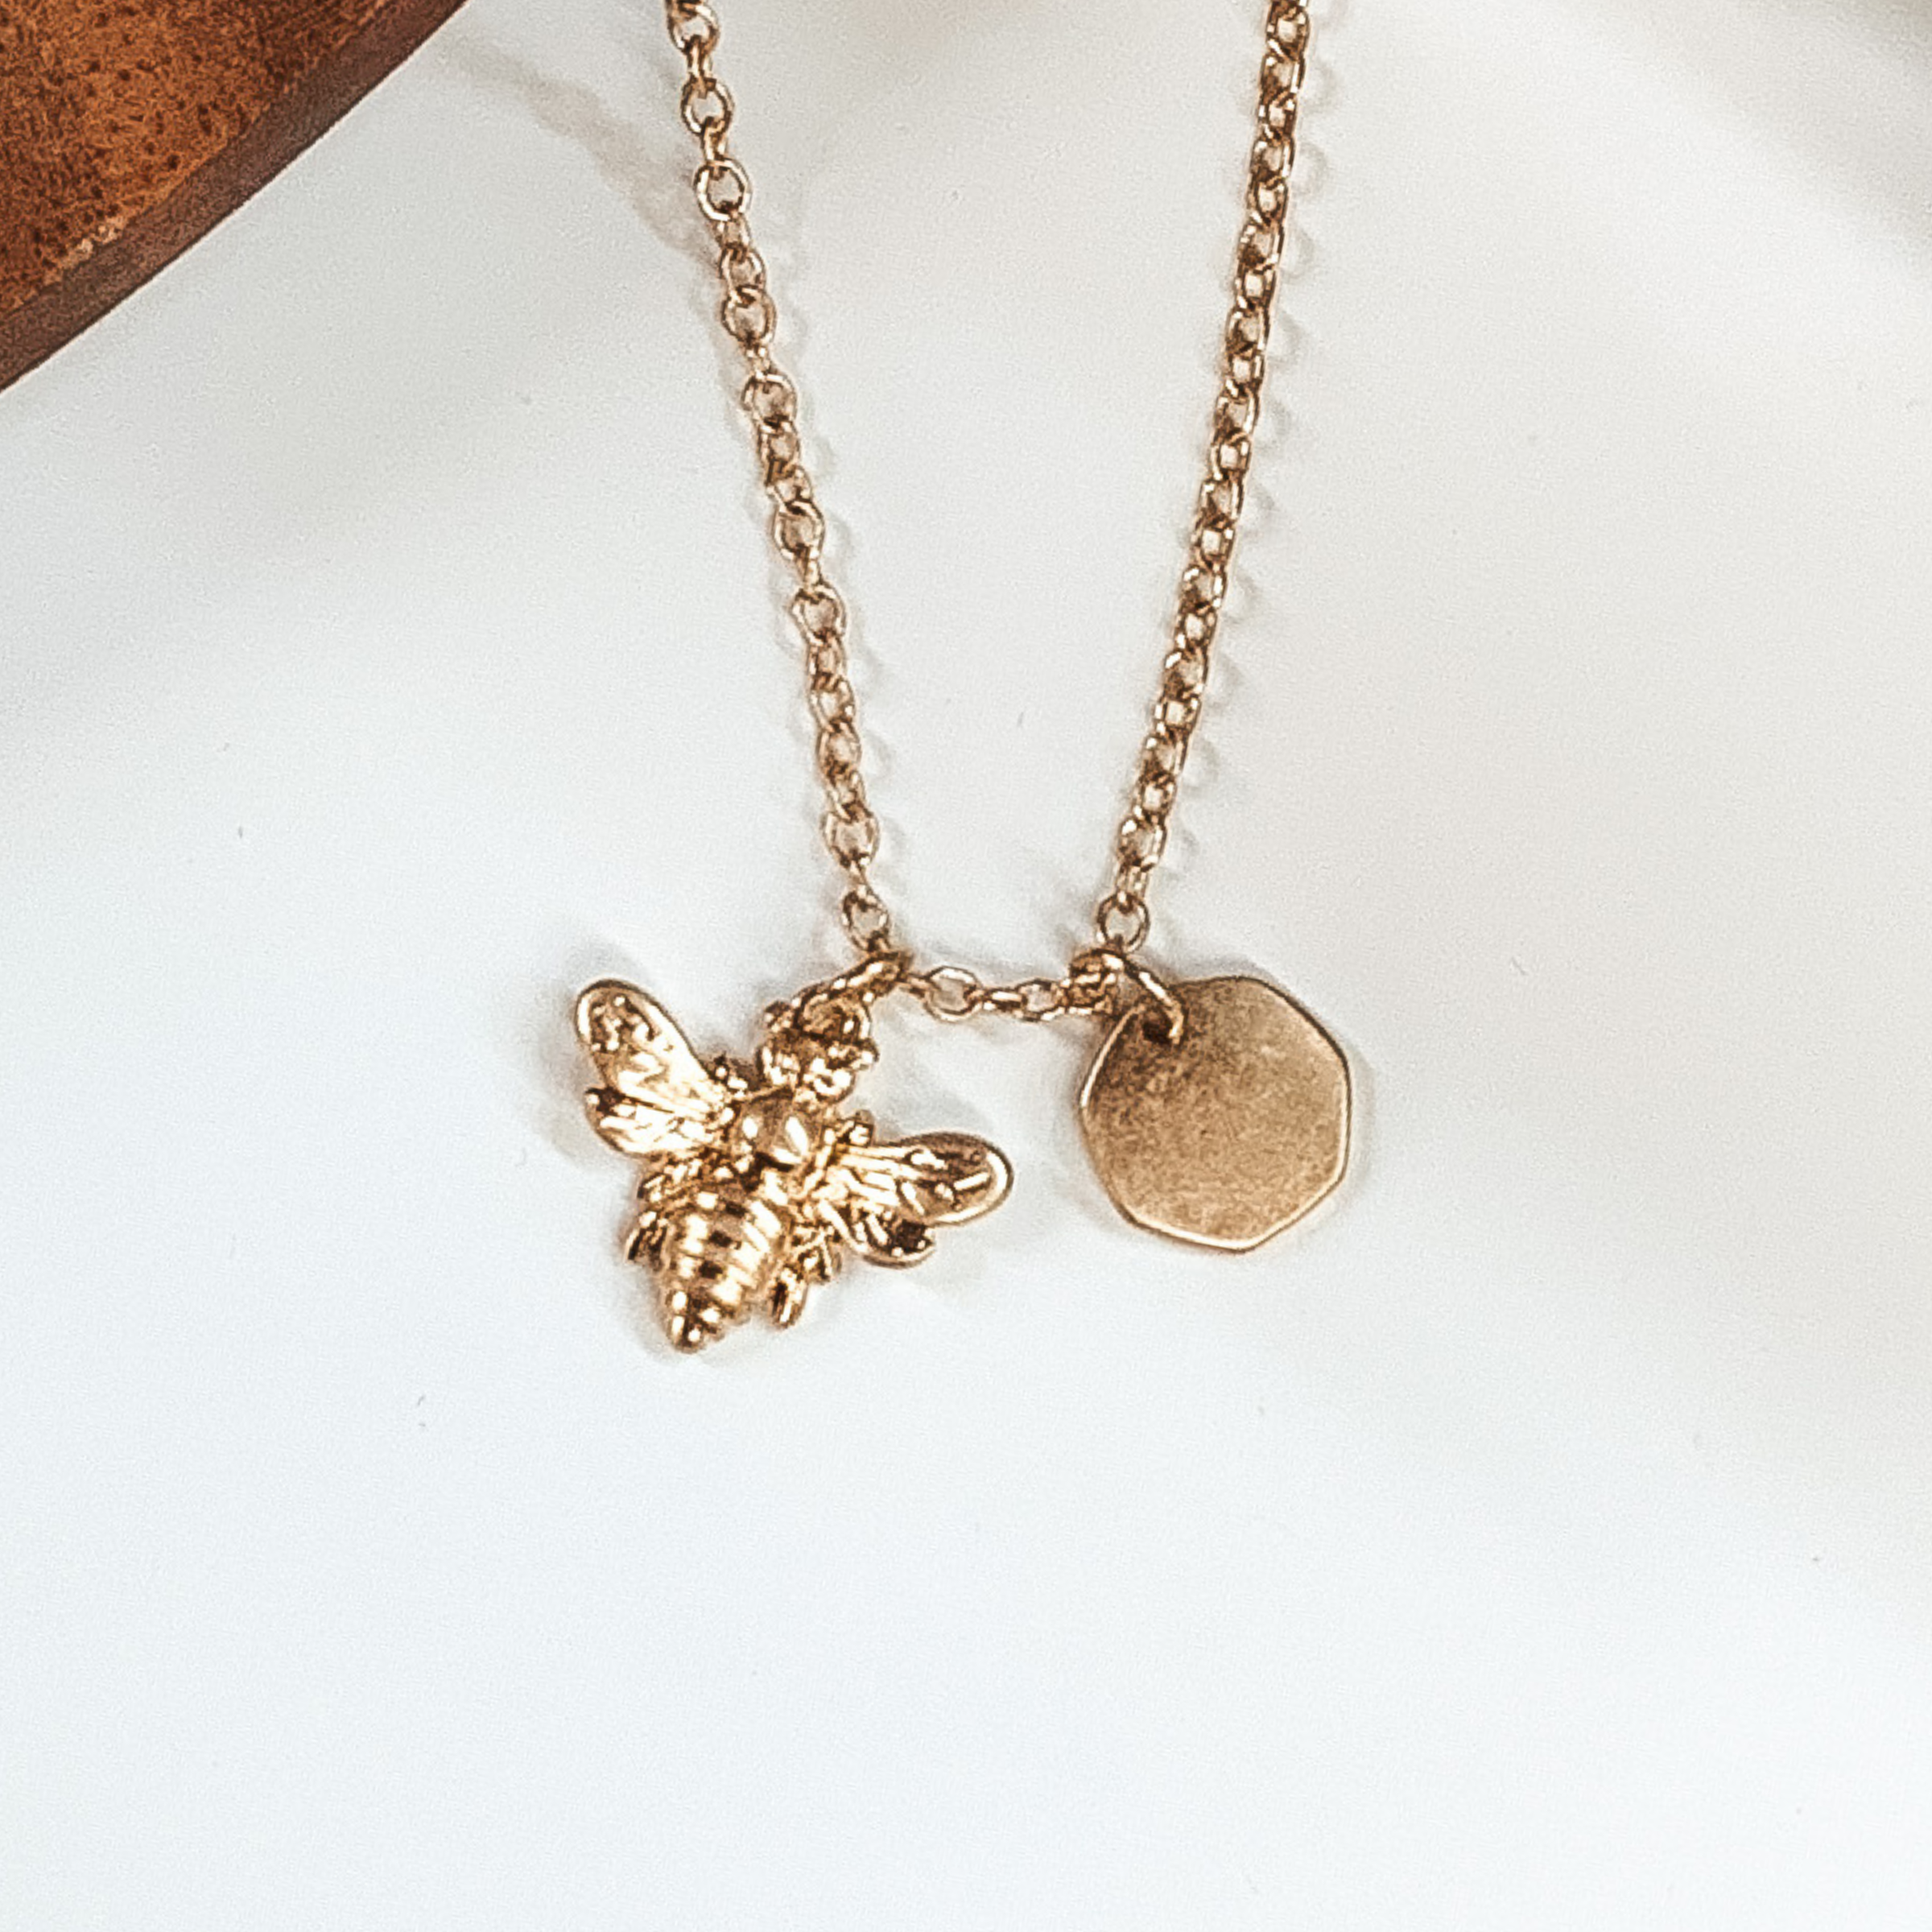 The Bee's Knees Necklace in Gold - Giddy Up Glamour Boutique